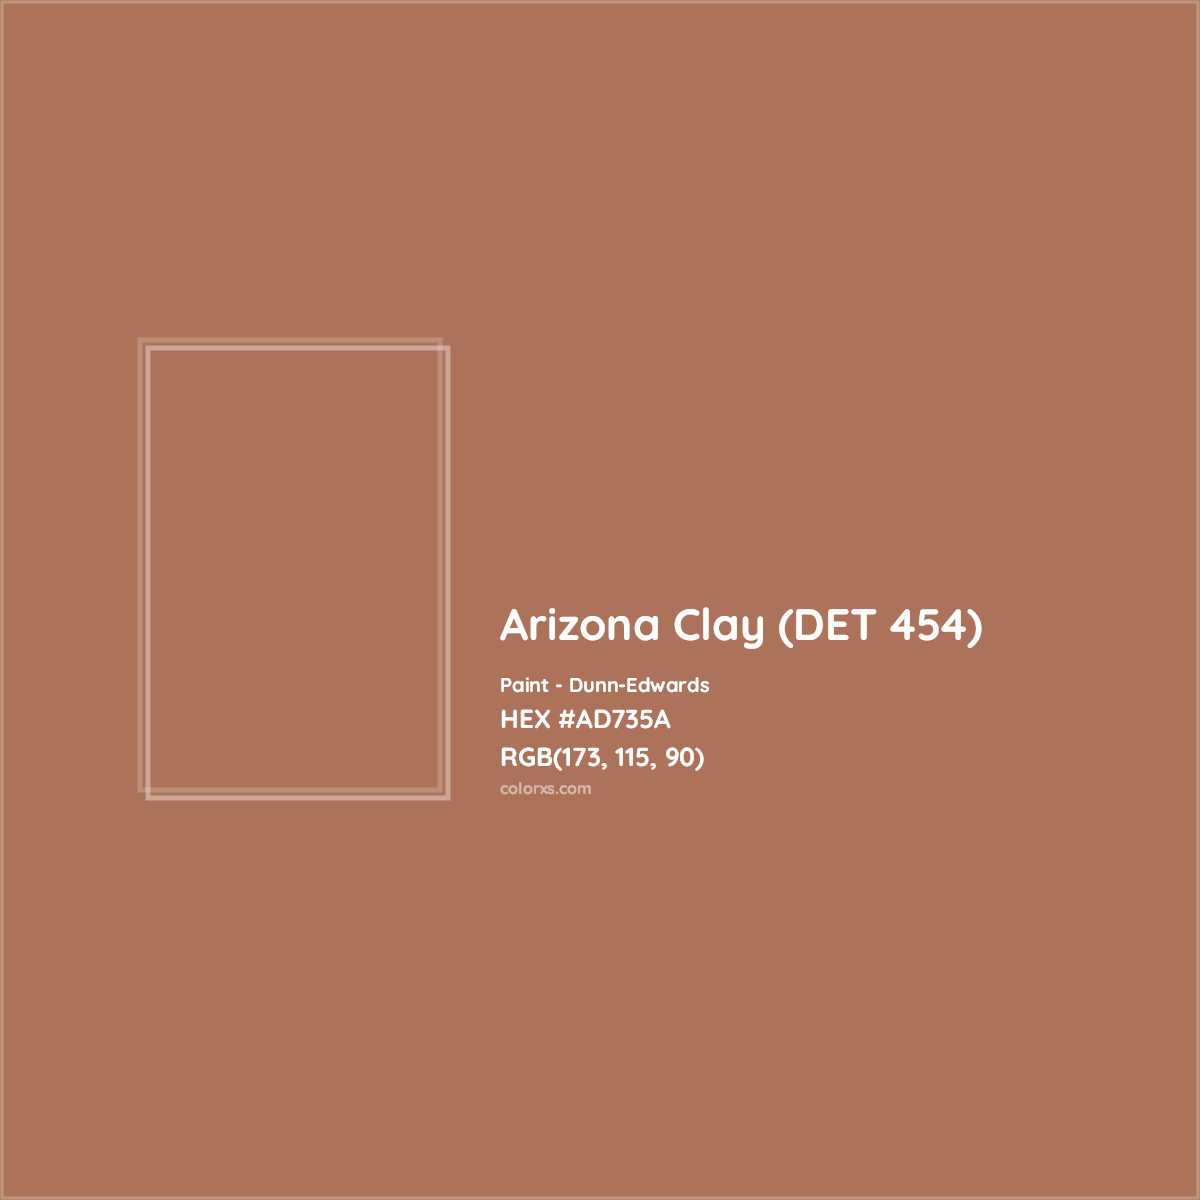 HEX #AD735A Arizona Clay (DET 454) Paint Dunn-Edwards - Color Code